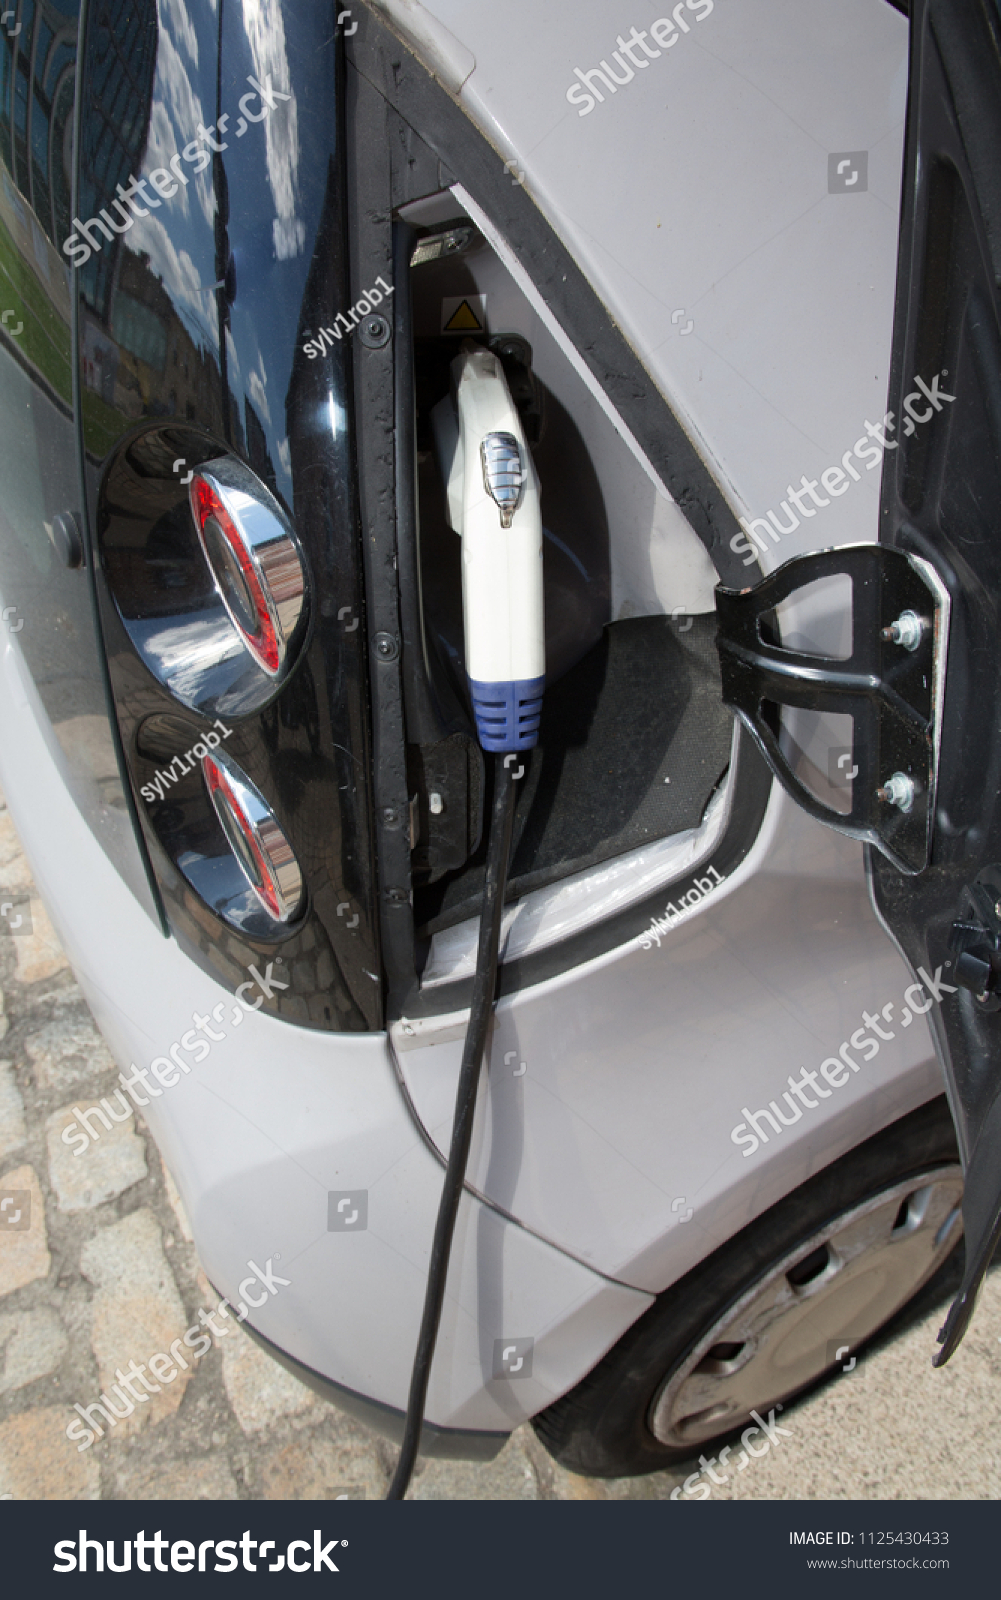 electric car are charged by charging stations in the parking lot #1125430433